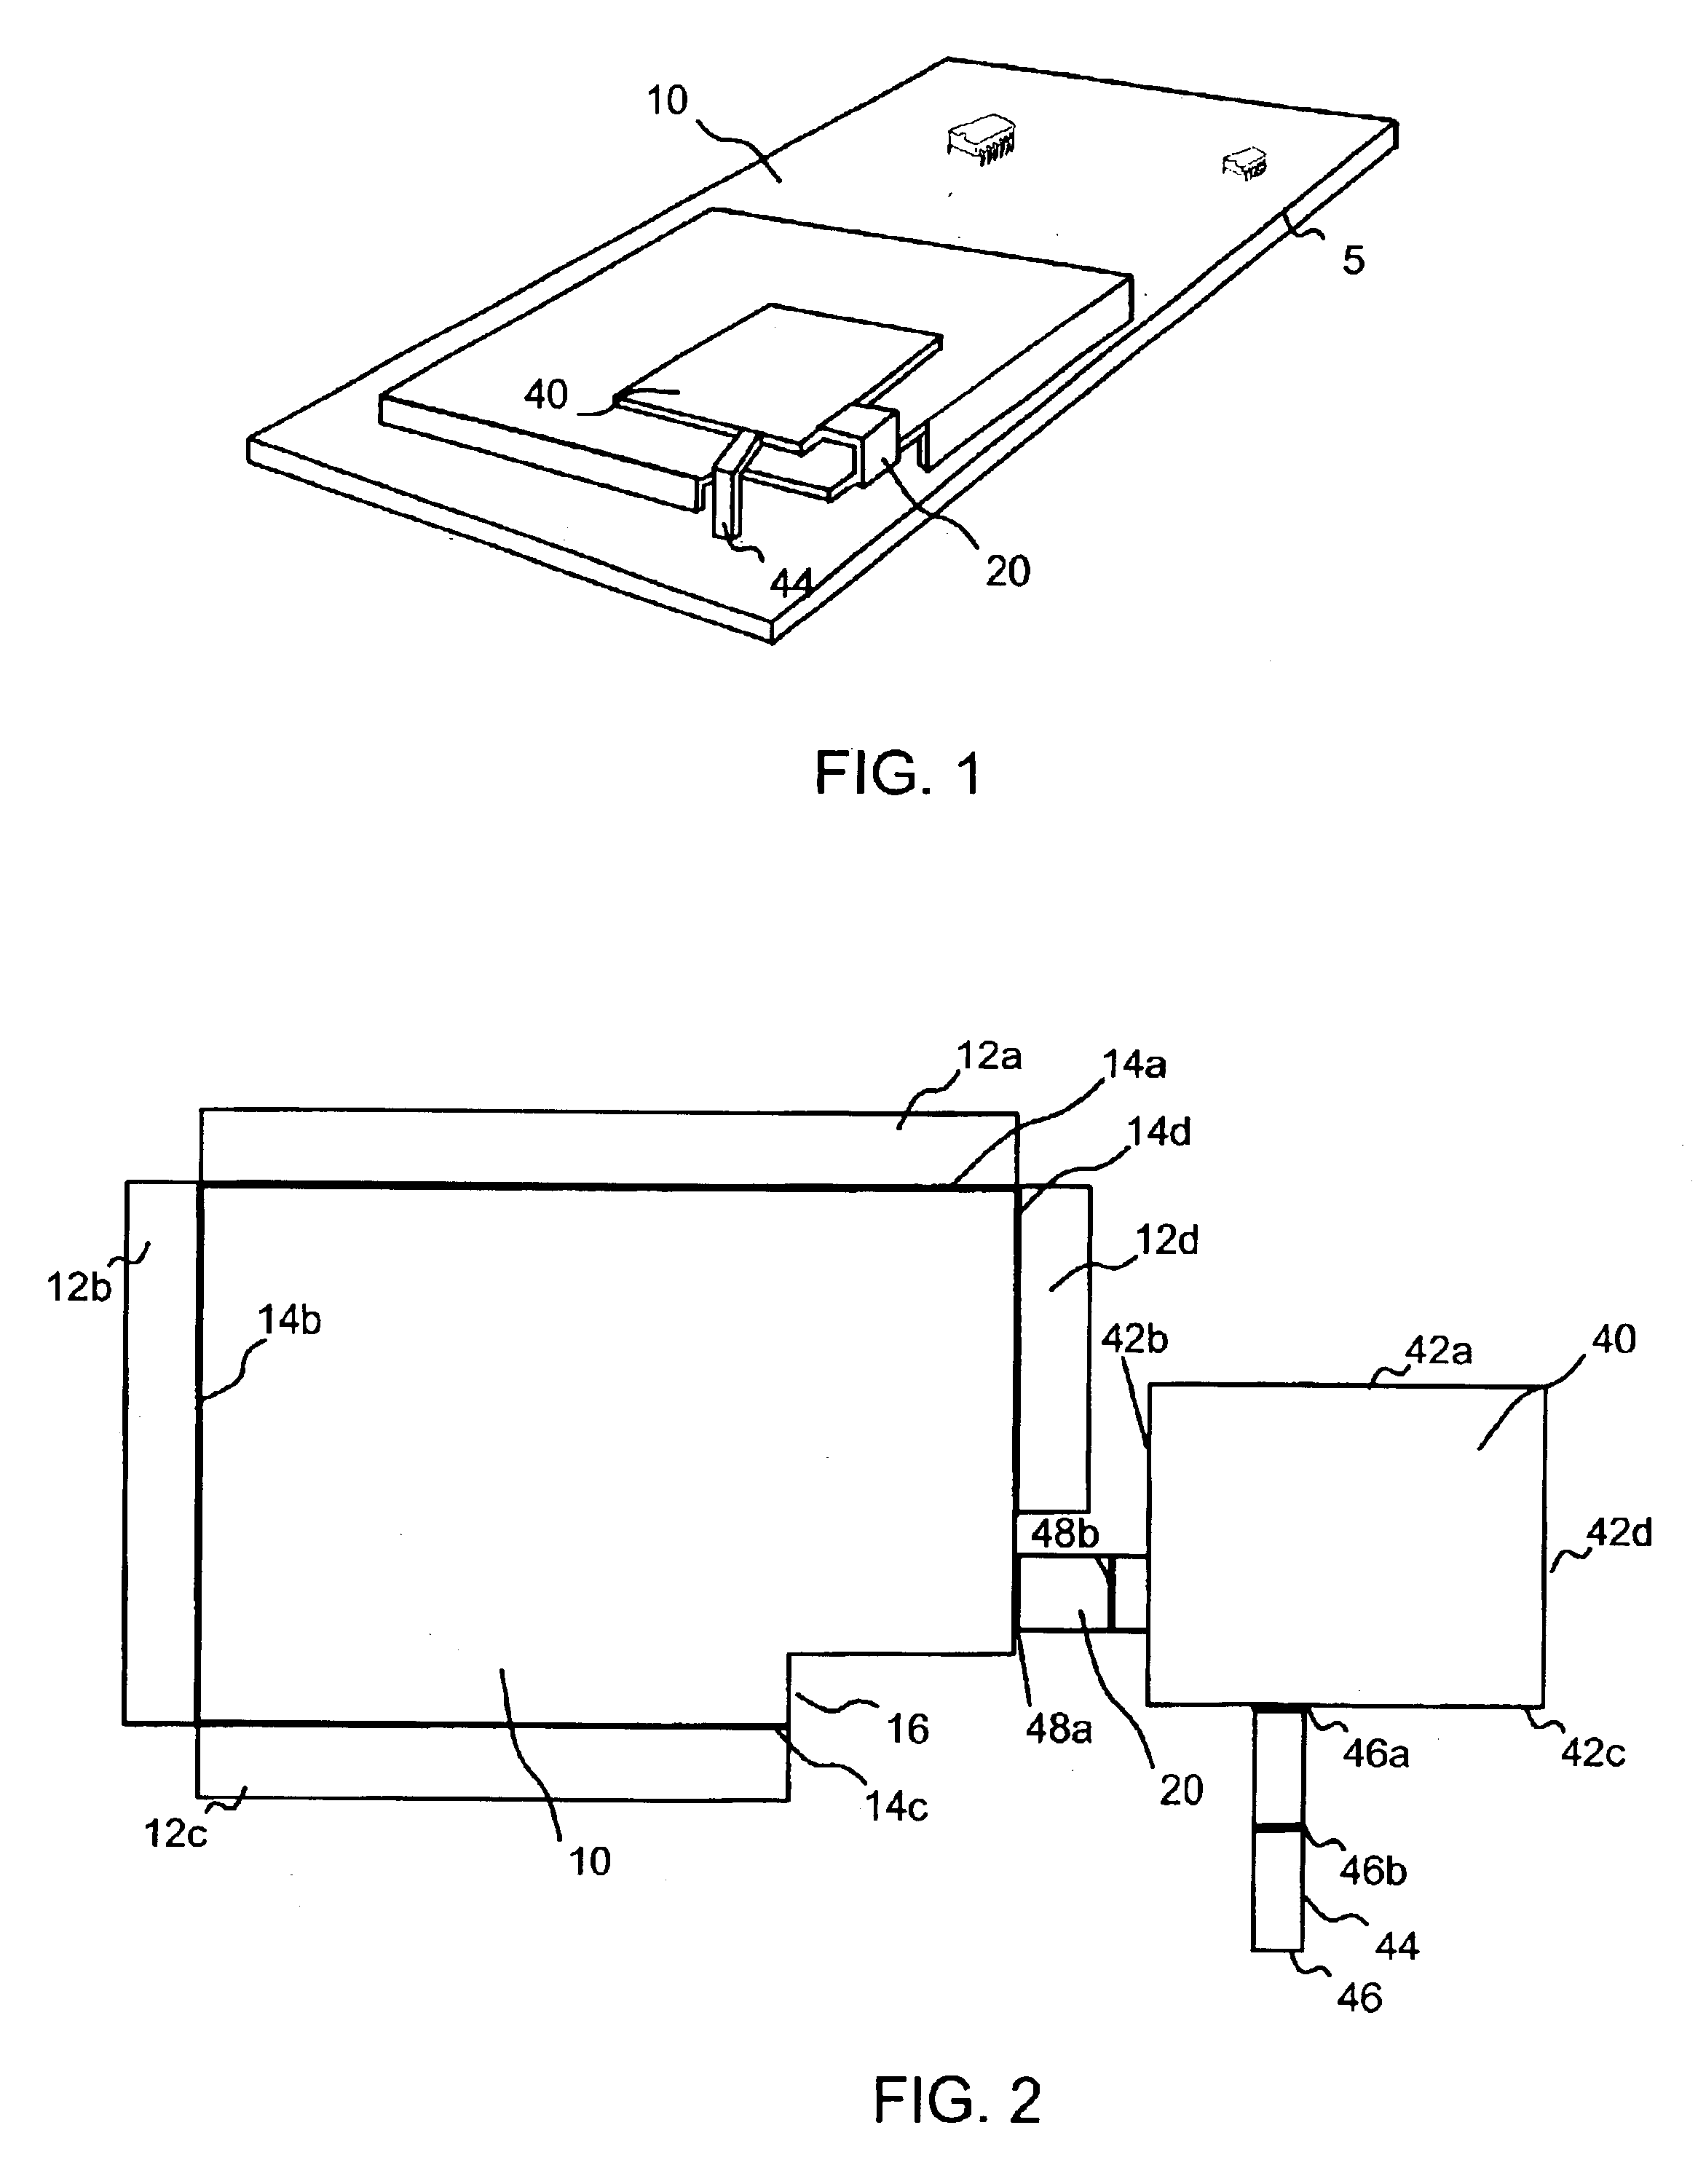 Integrated inverted F antenna and shield can